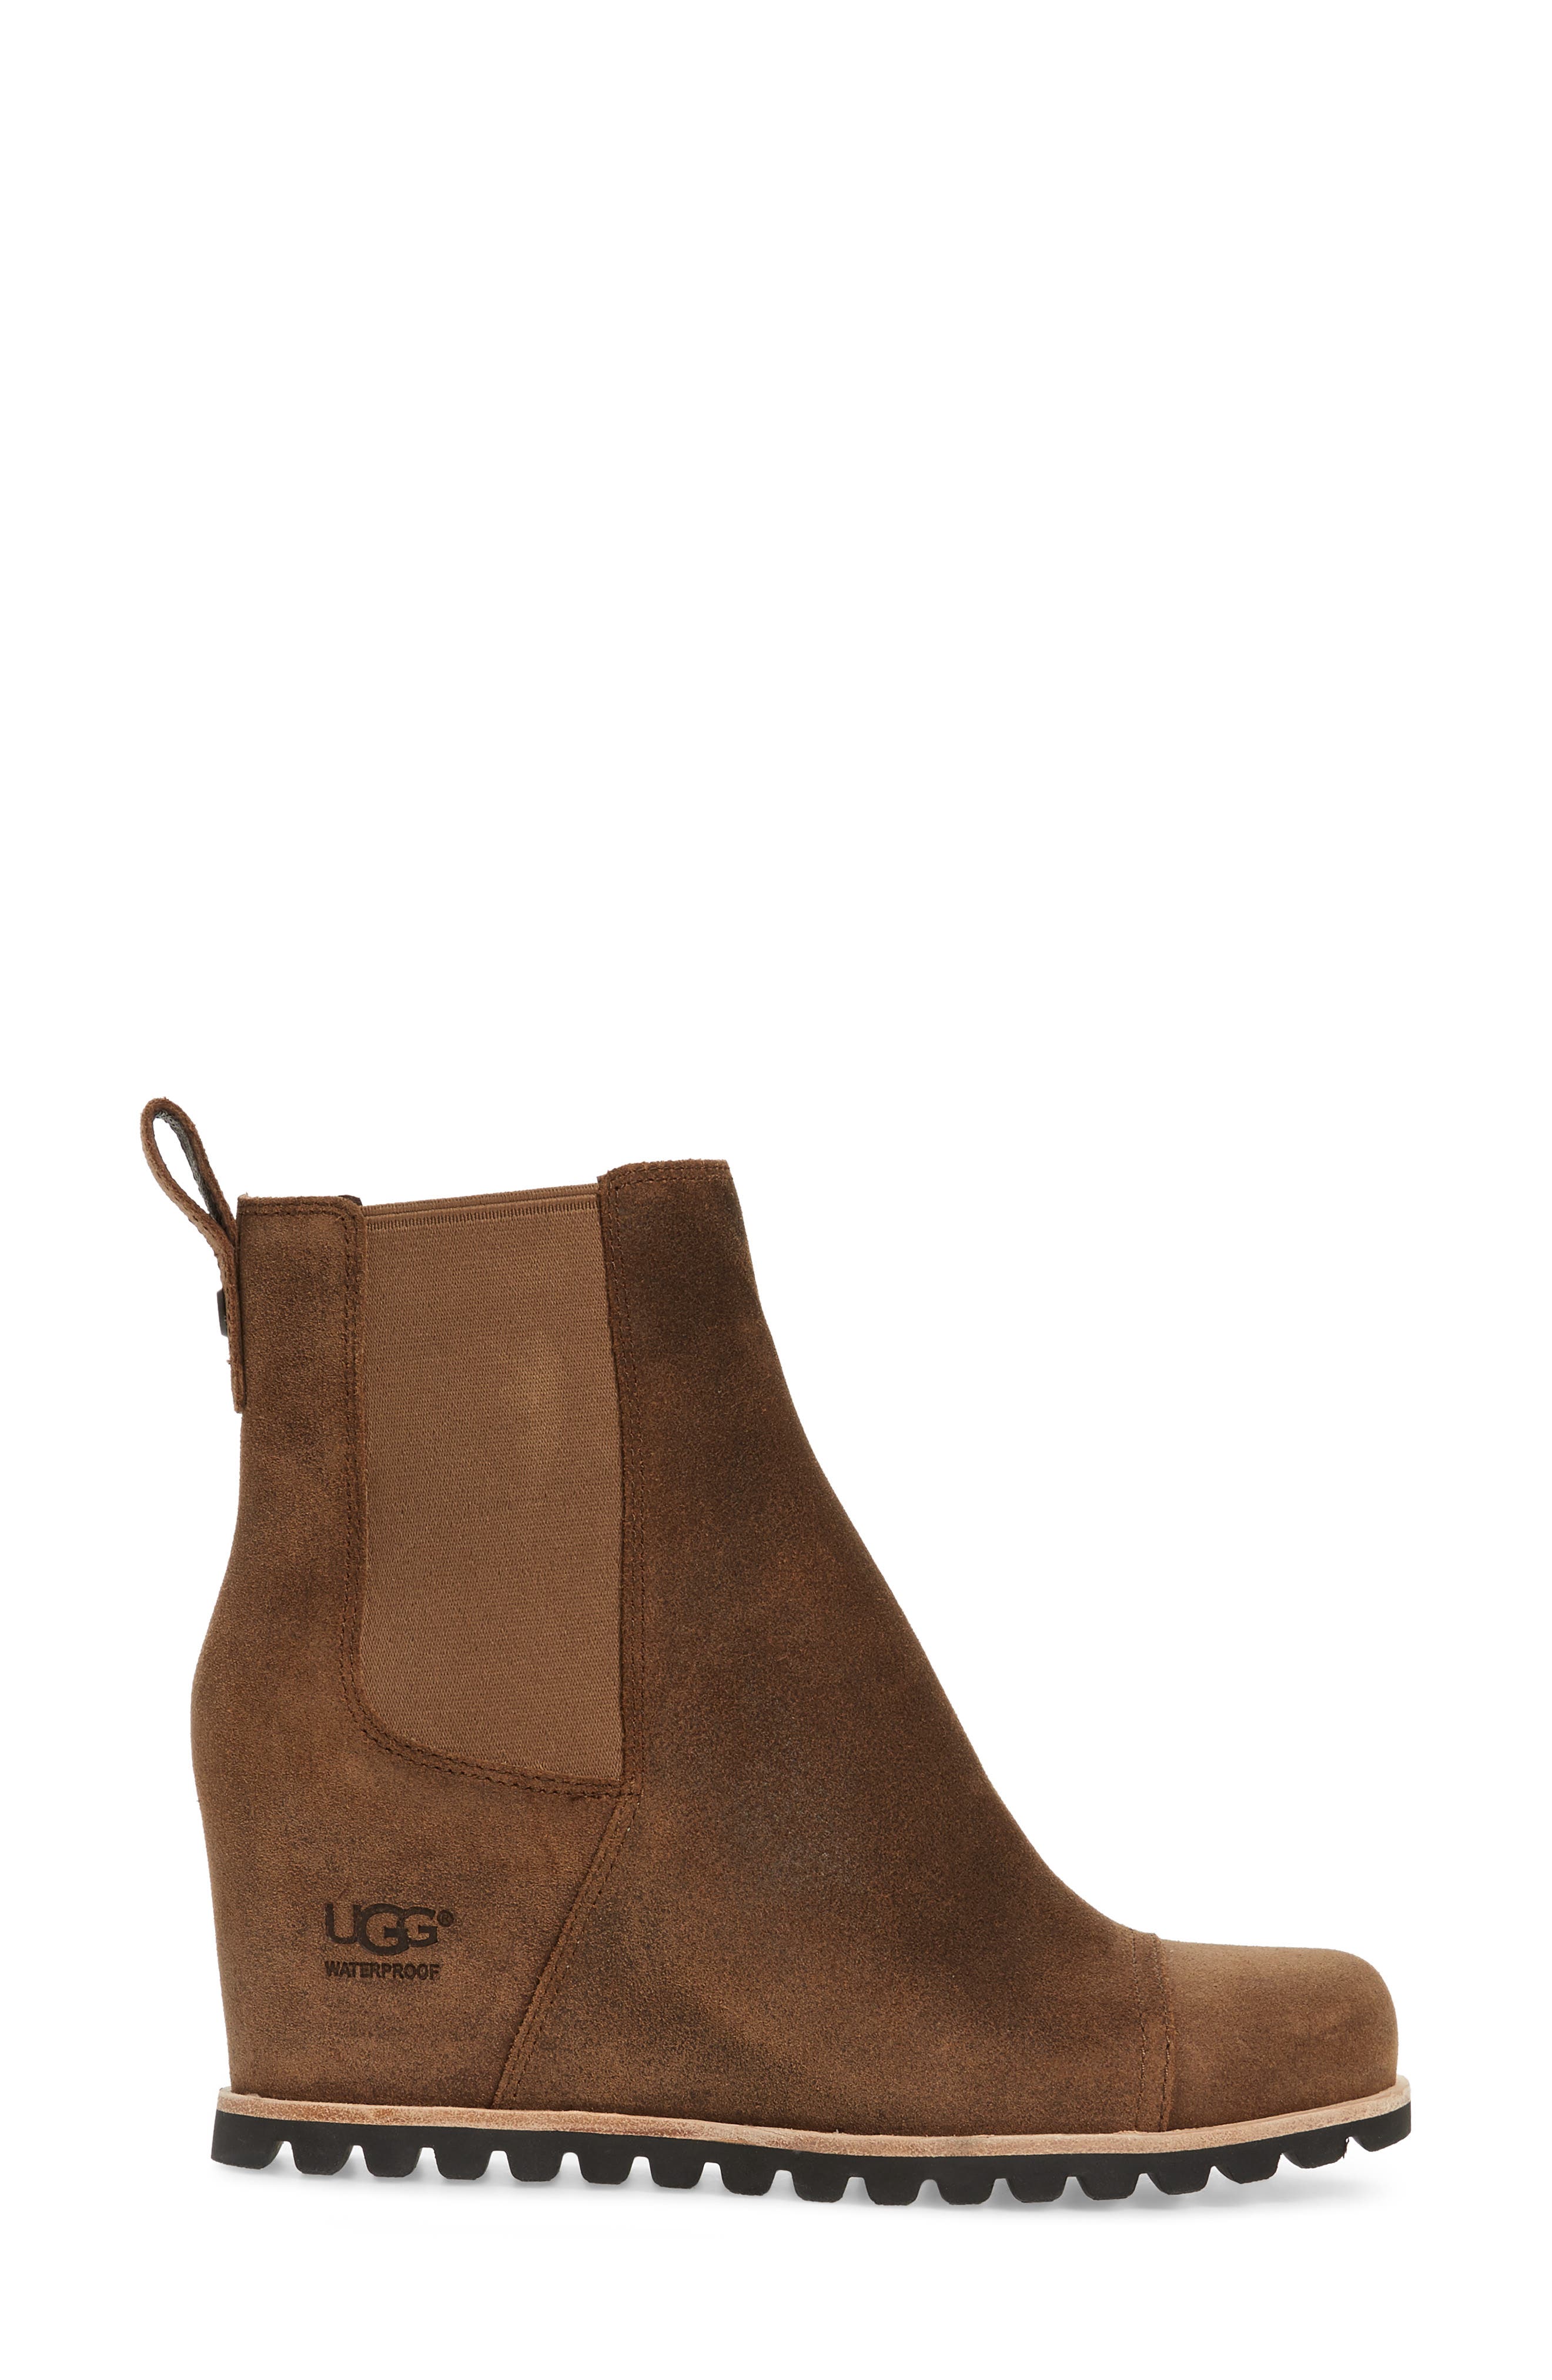 ugg pax wedge boot